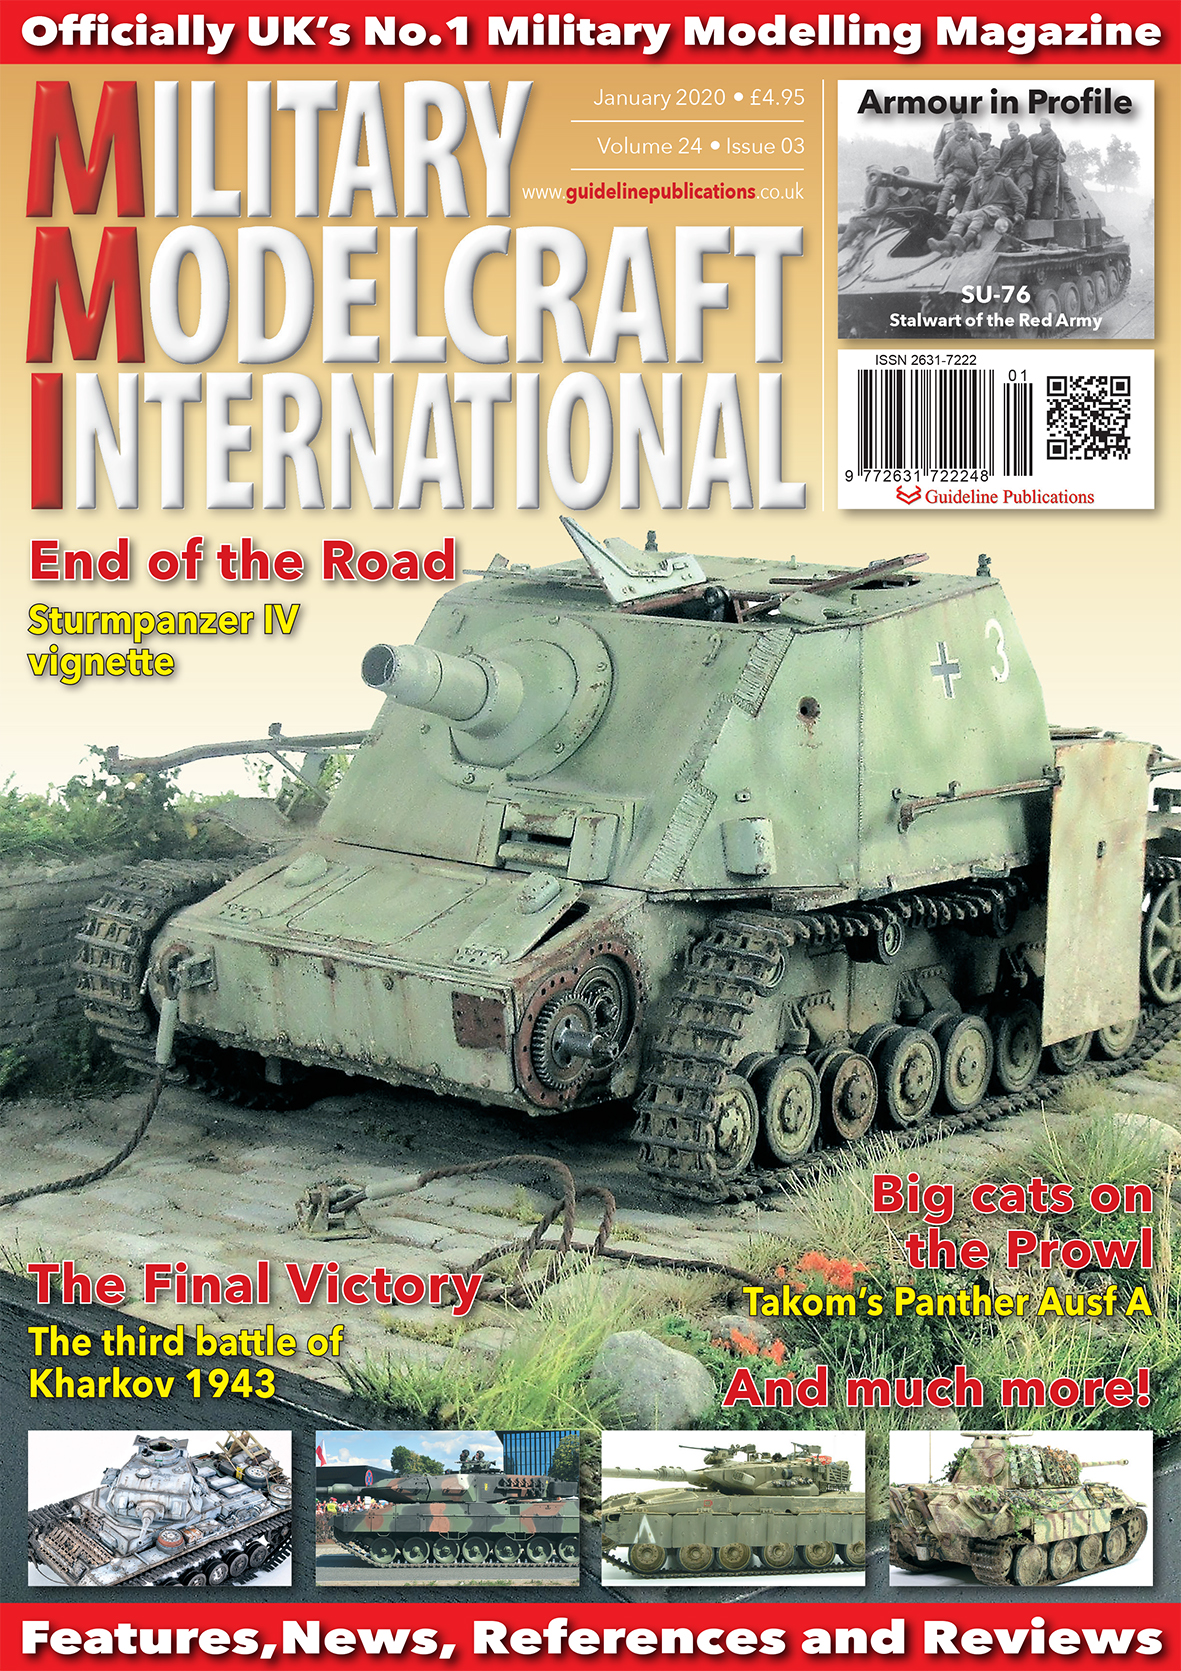 Guideline Publications Military Modelcraft Int Jan 20 vol 24-03 January 2020 